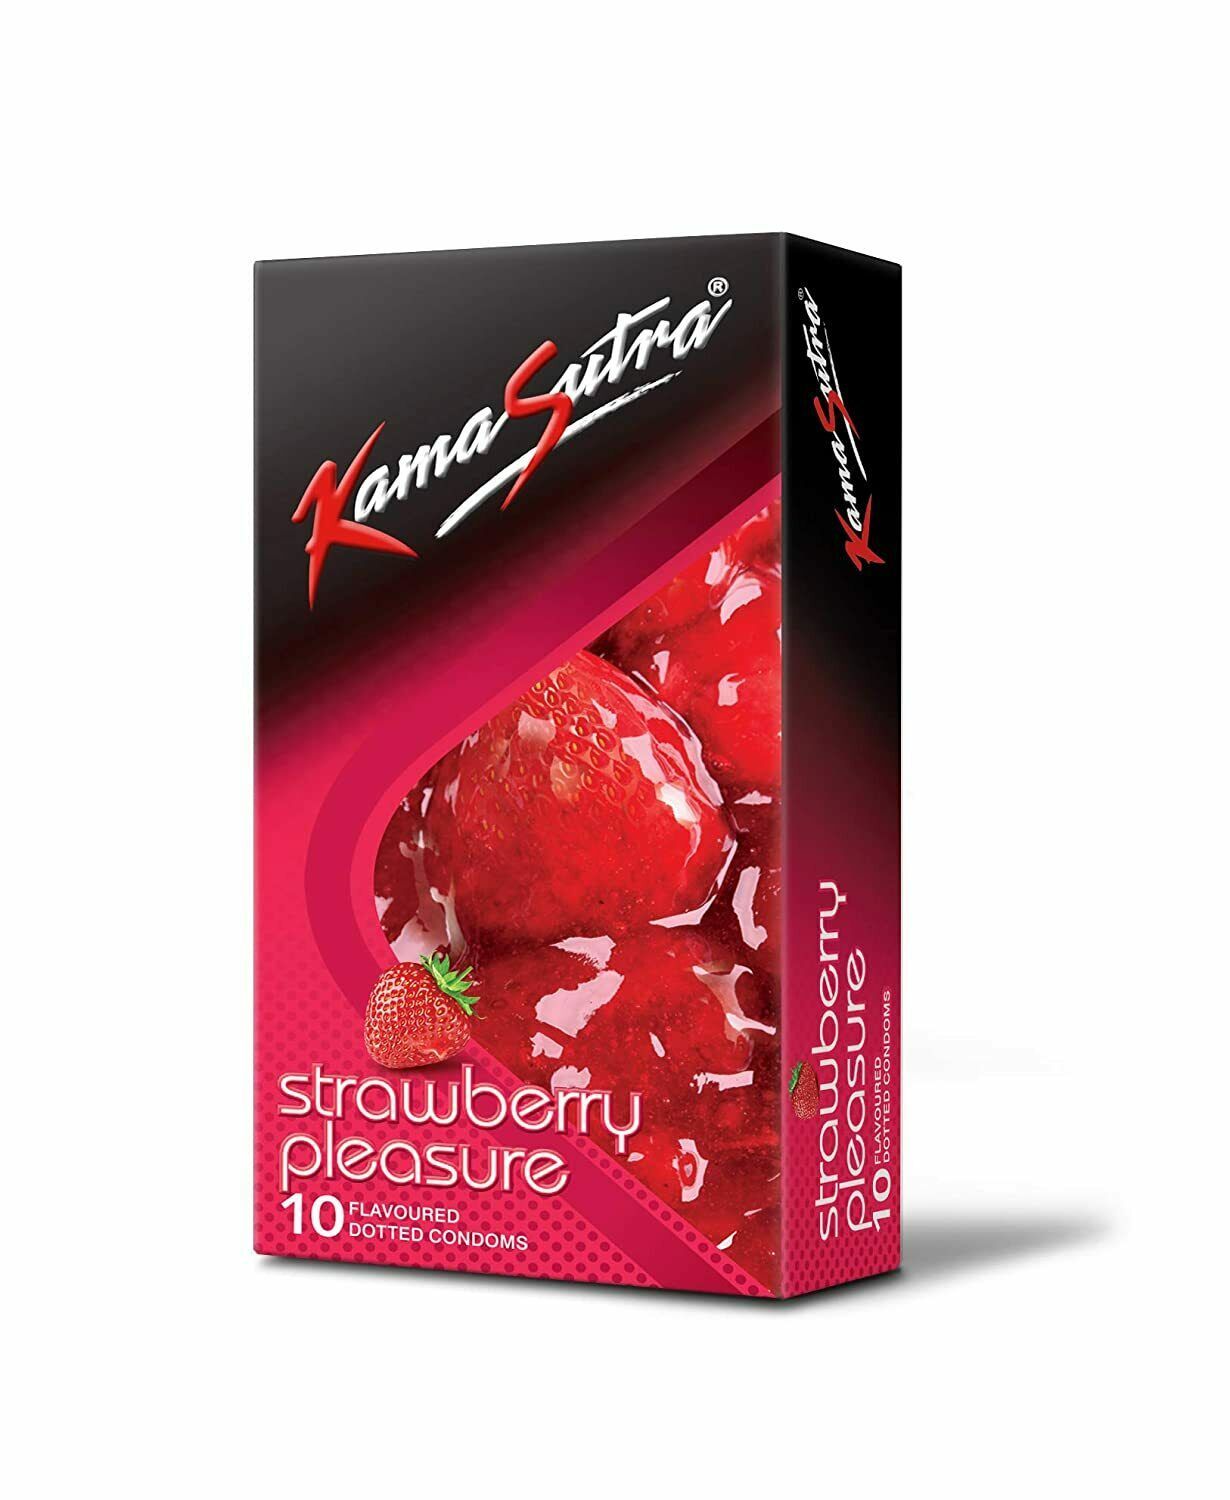 KamaSutra Strawberry Pleasure Flavoured Condoms Pack of 10, clear